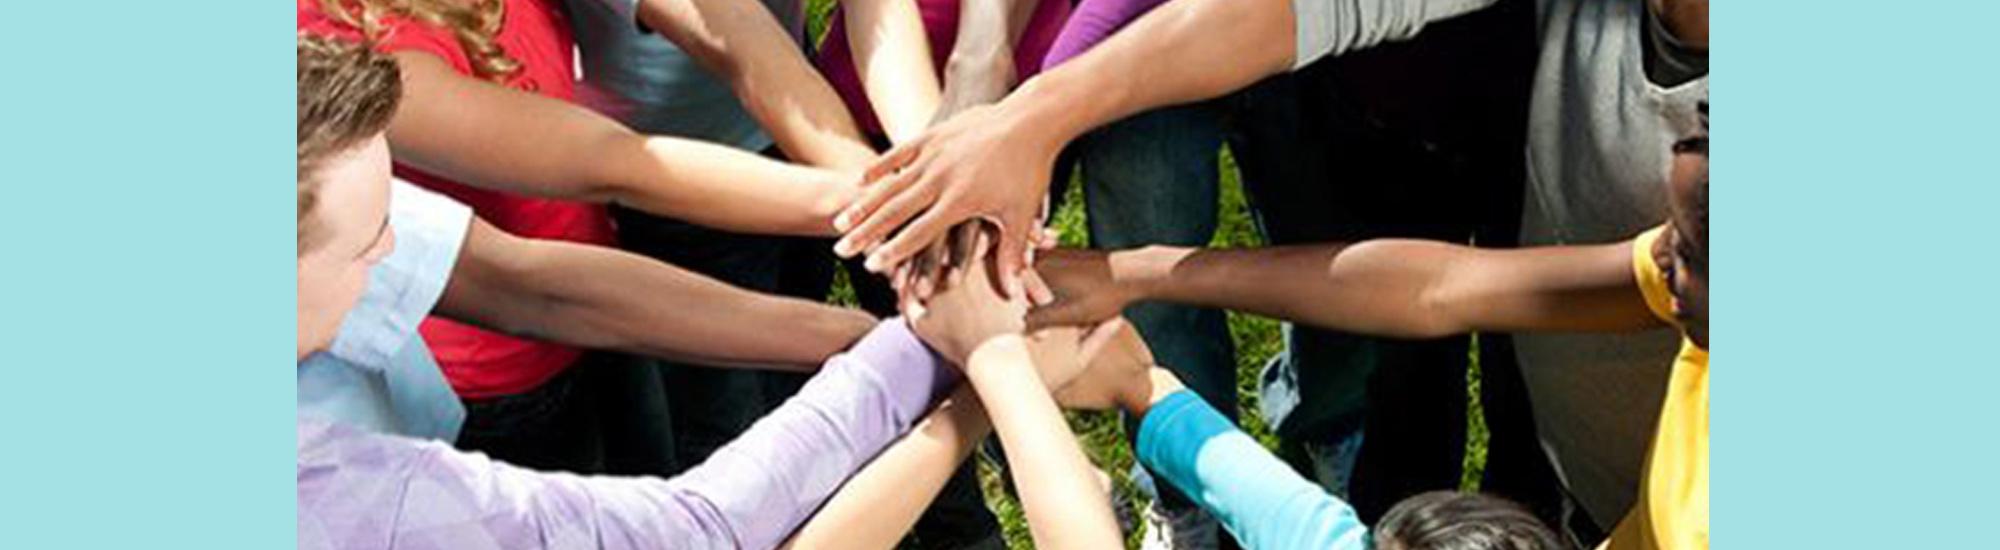 Circle of people with extended arms, hands upon hands.